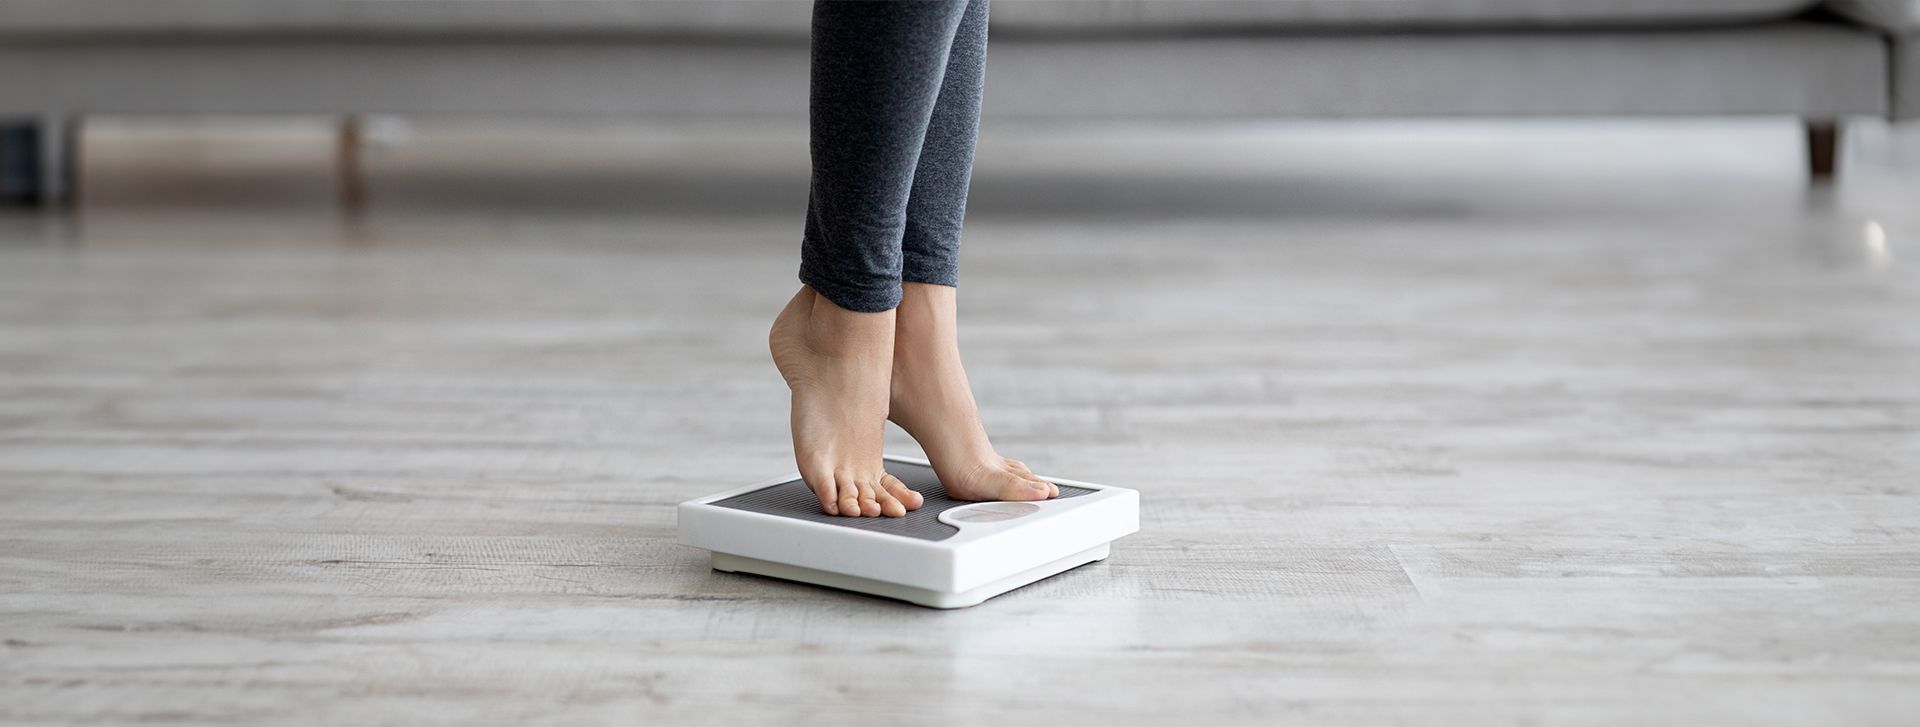 7 Things That Happen When You Lose 5% of Your Weight